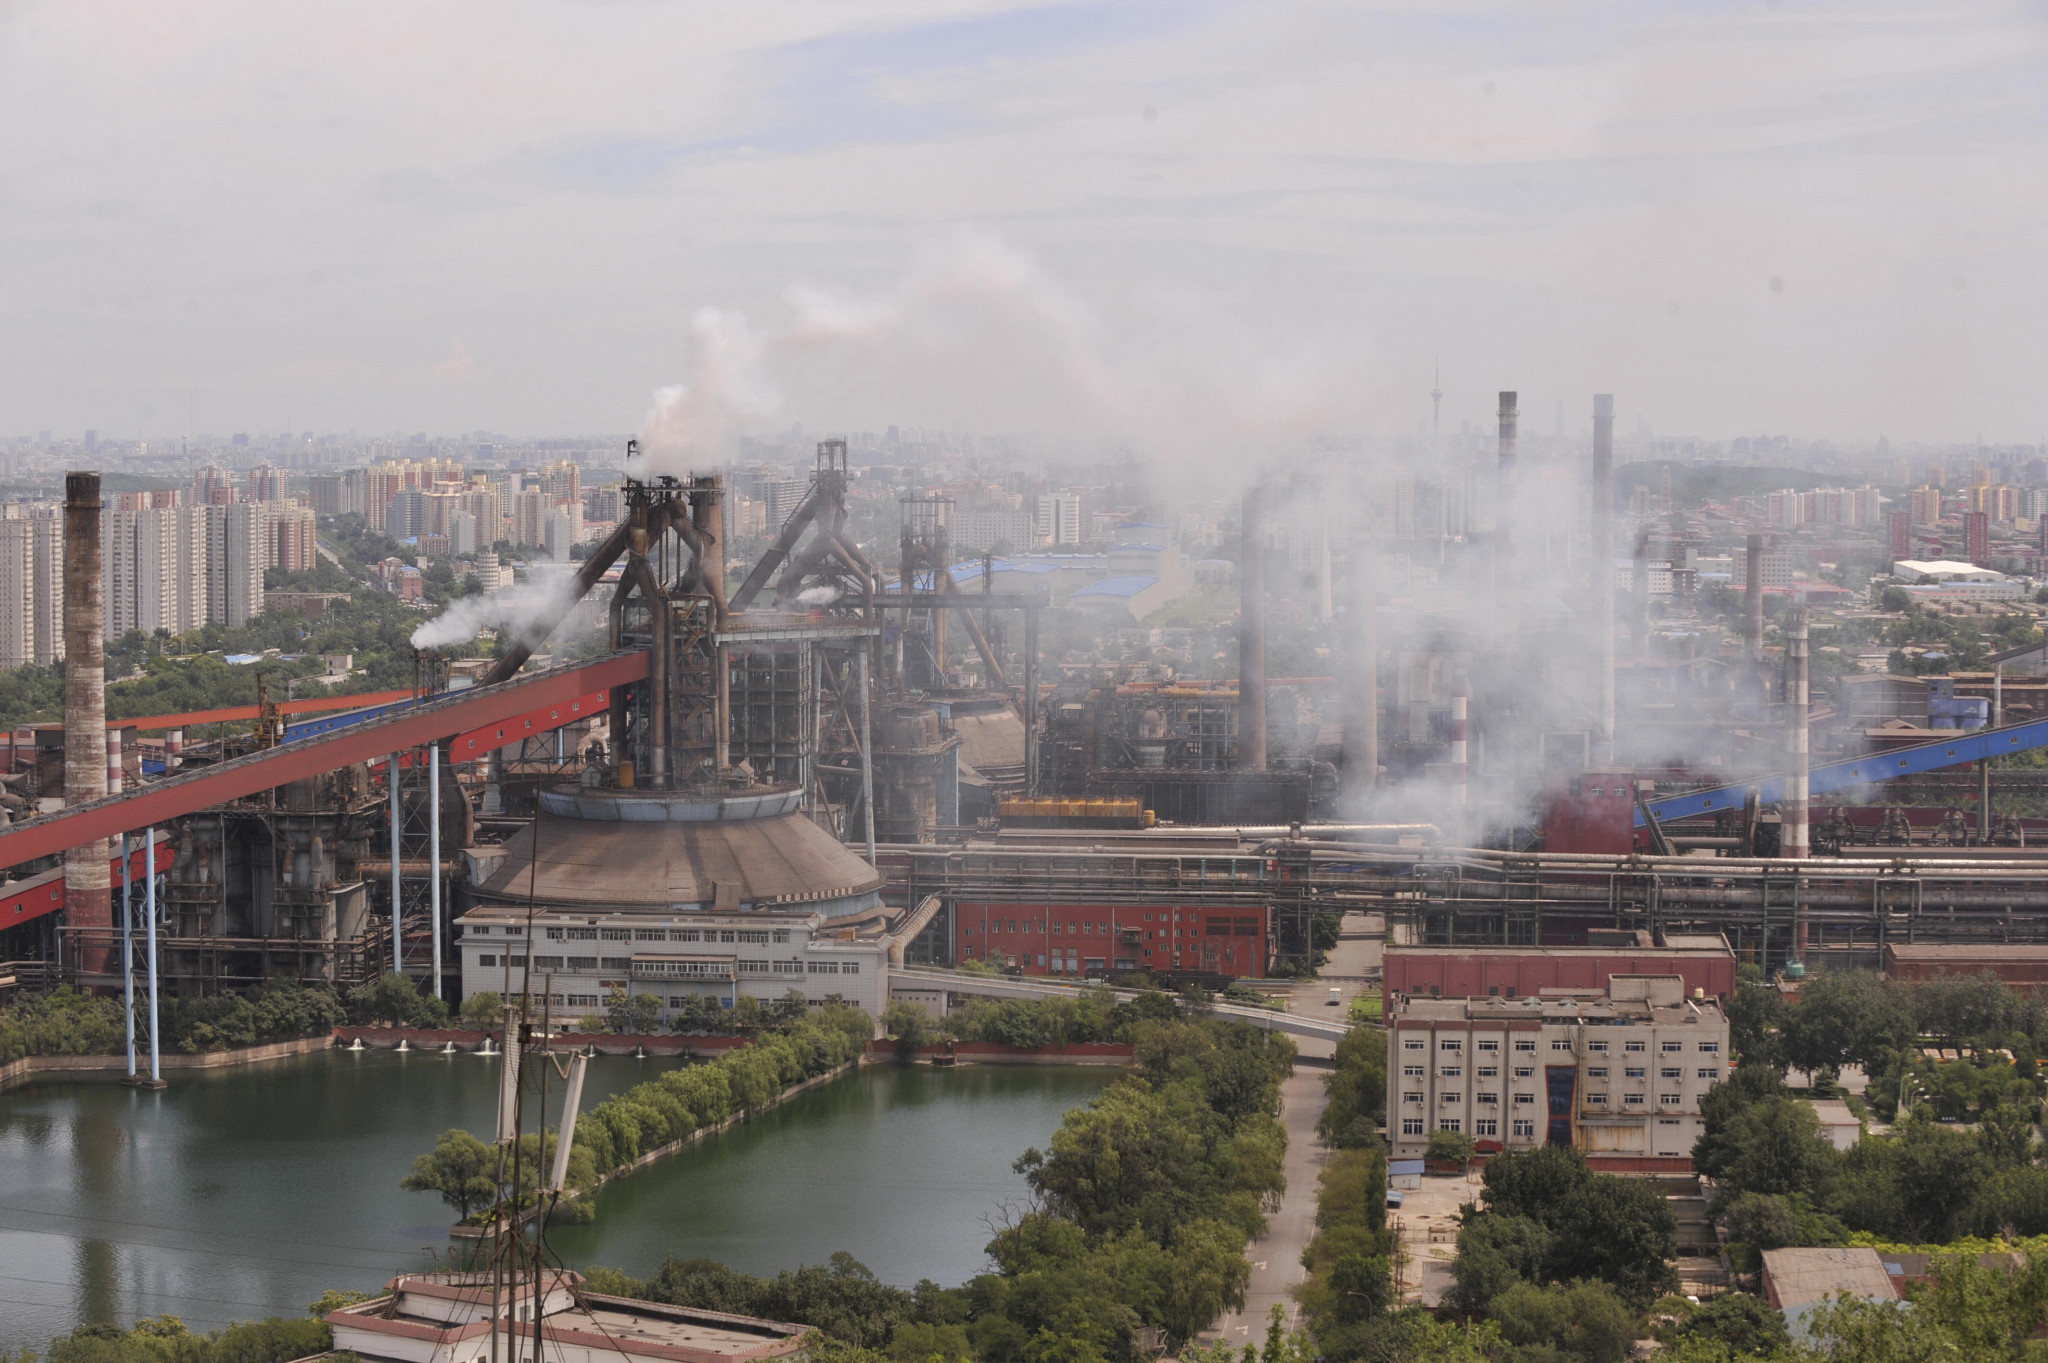 Former industrial district receives further investment before Beijing 2022